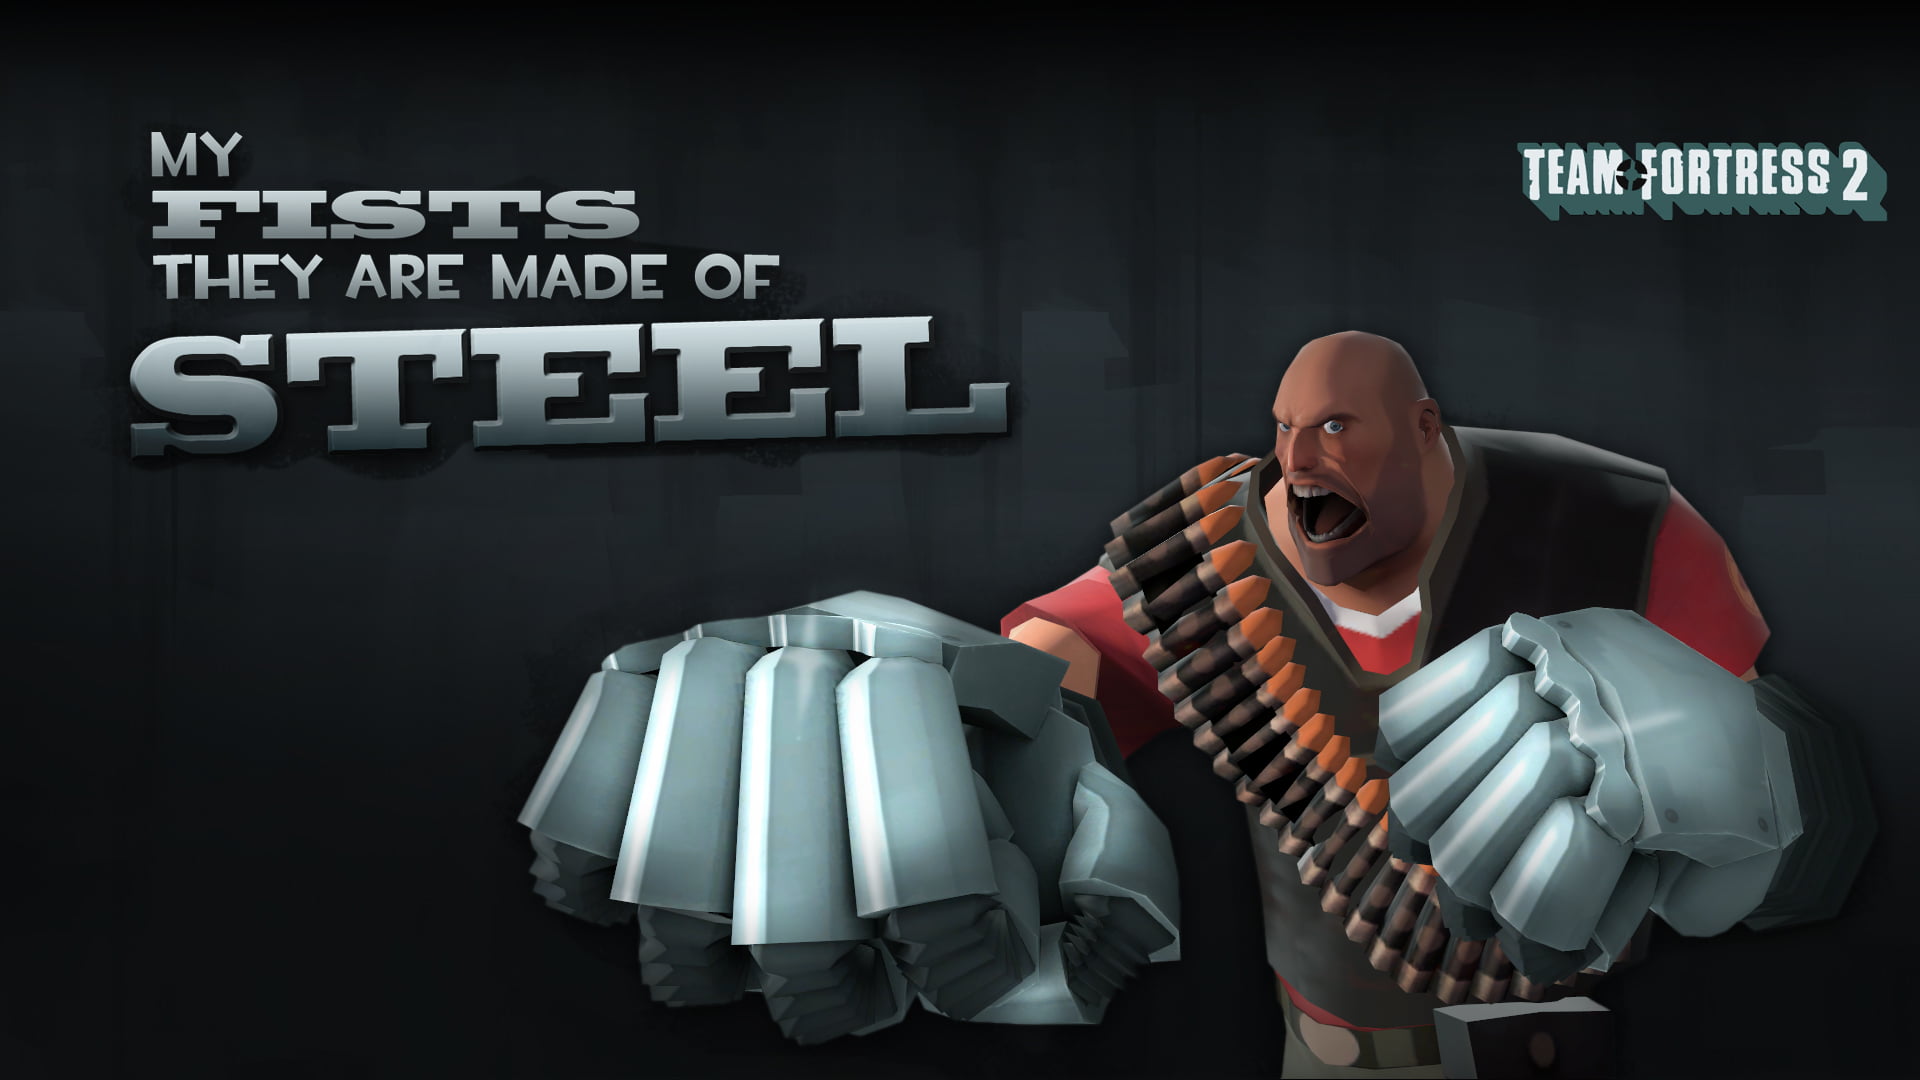 Team Fortress 2, Heavy (charater), shouting, one person, men